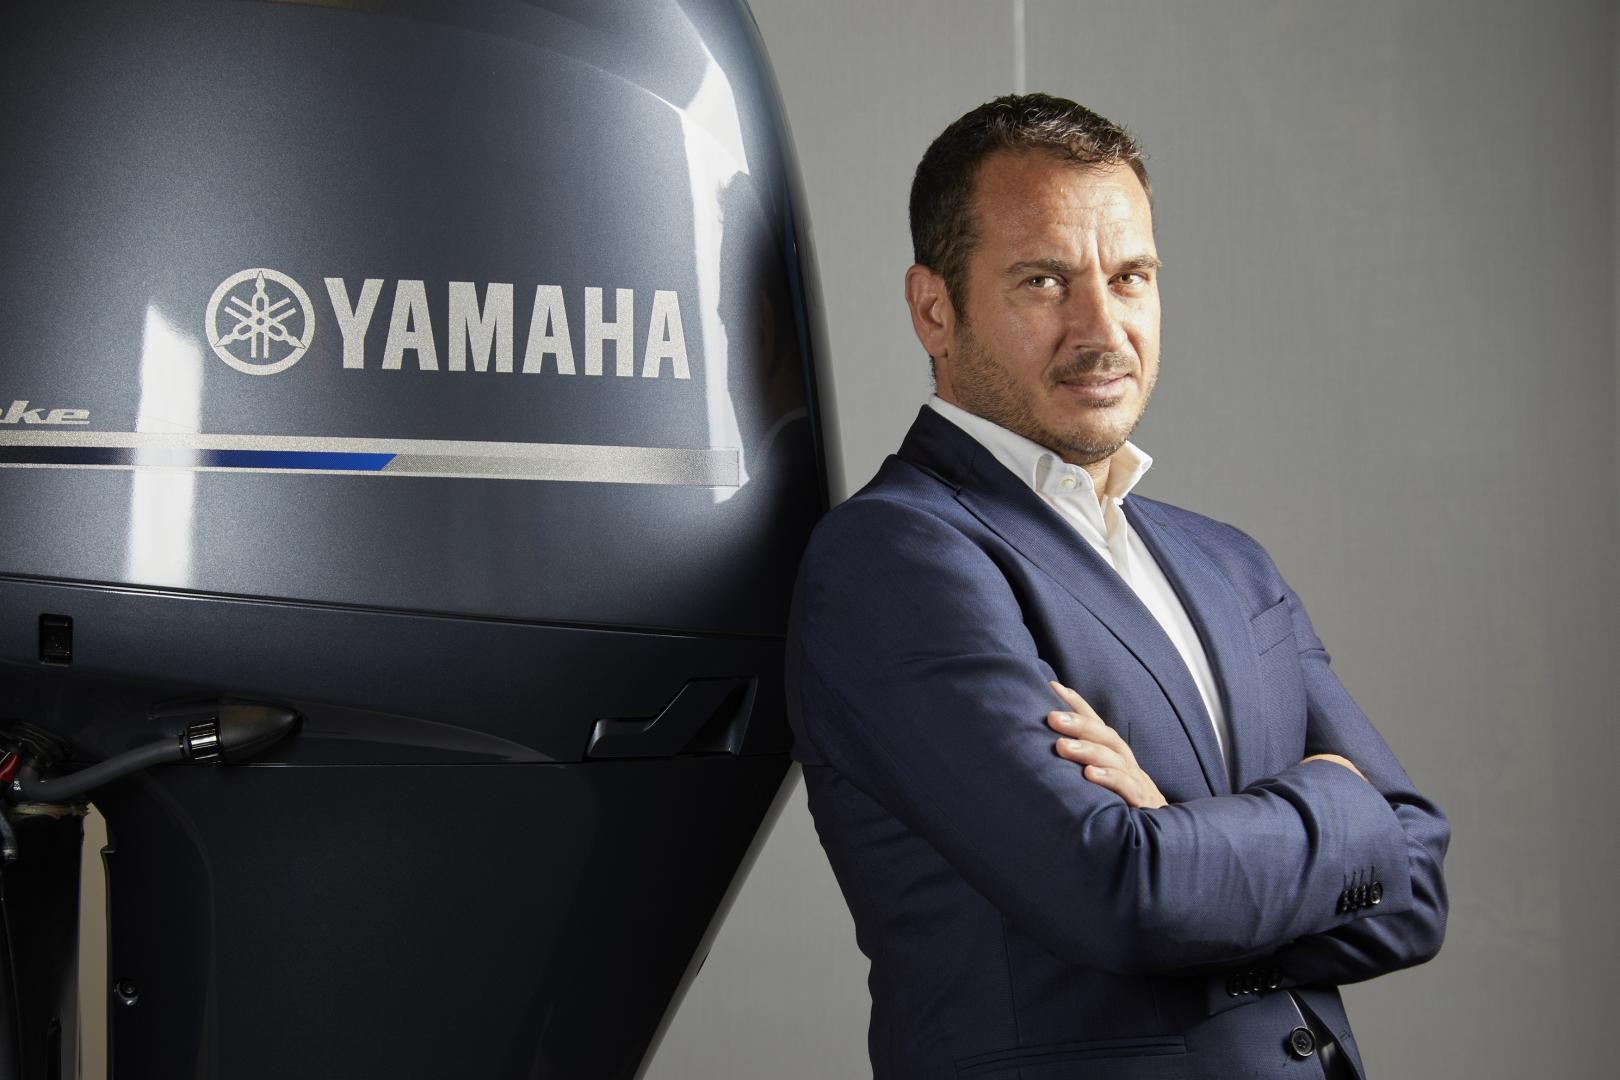 Andrea Colombi - Country Manager Yamaha Motor Italia, photo by Diego Ravier